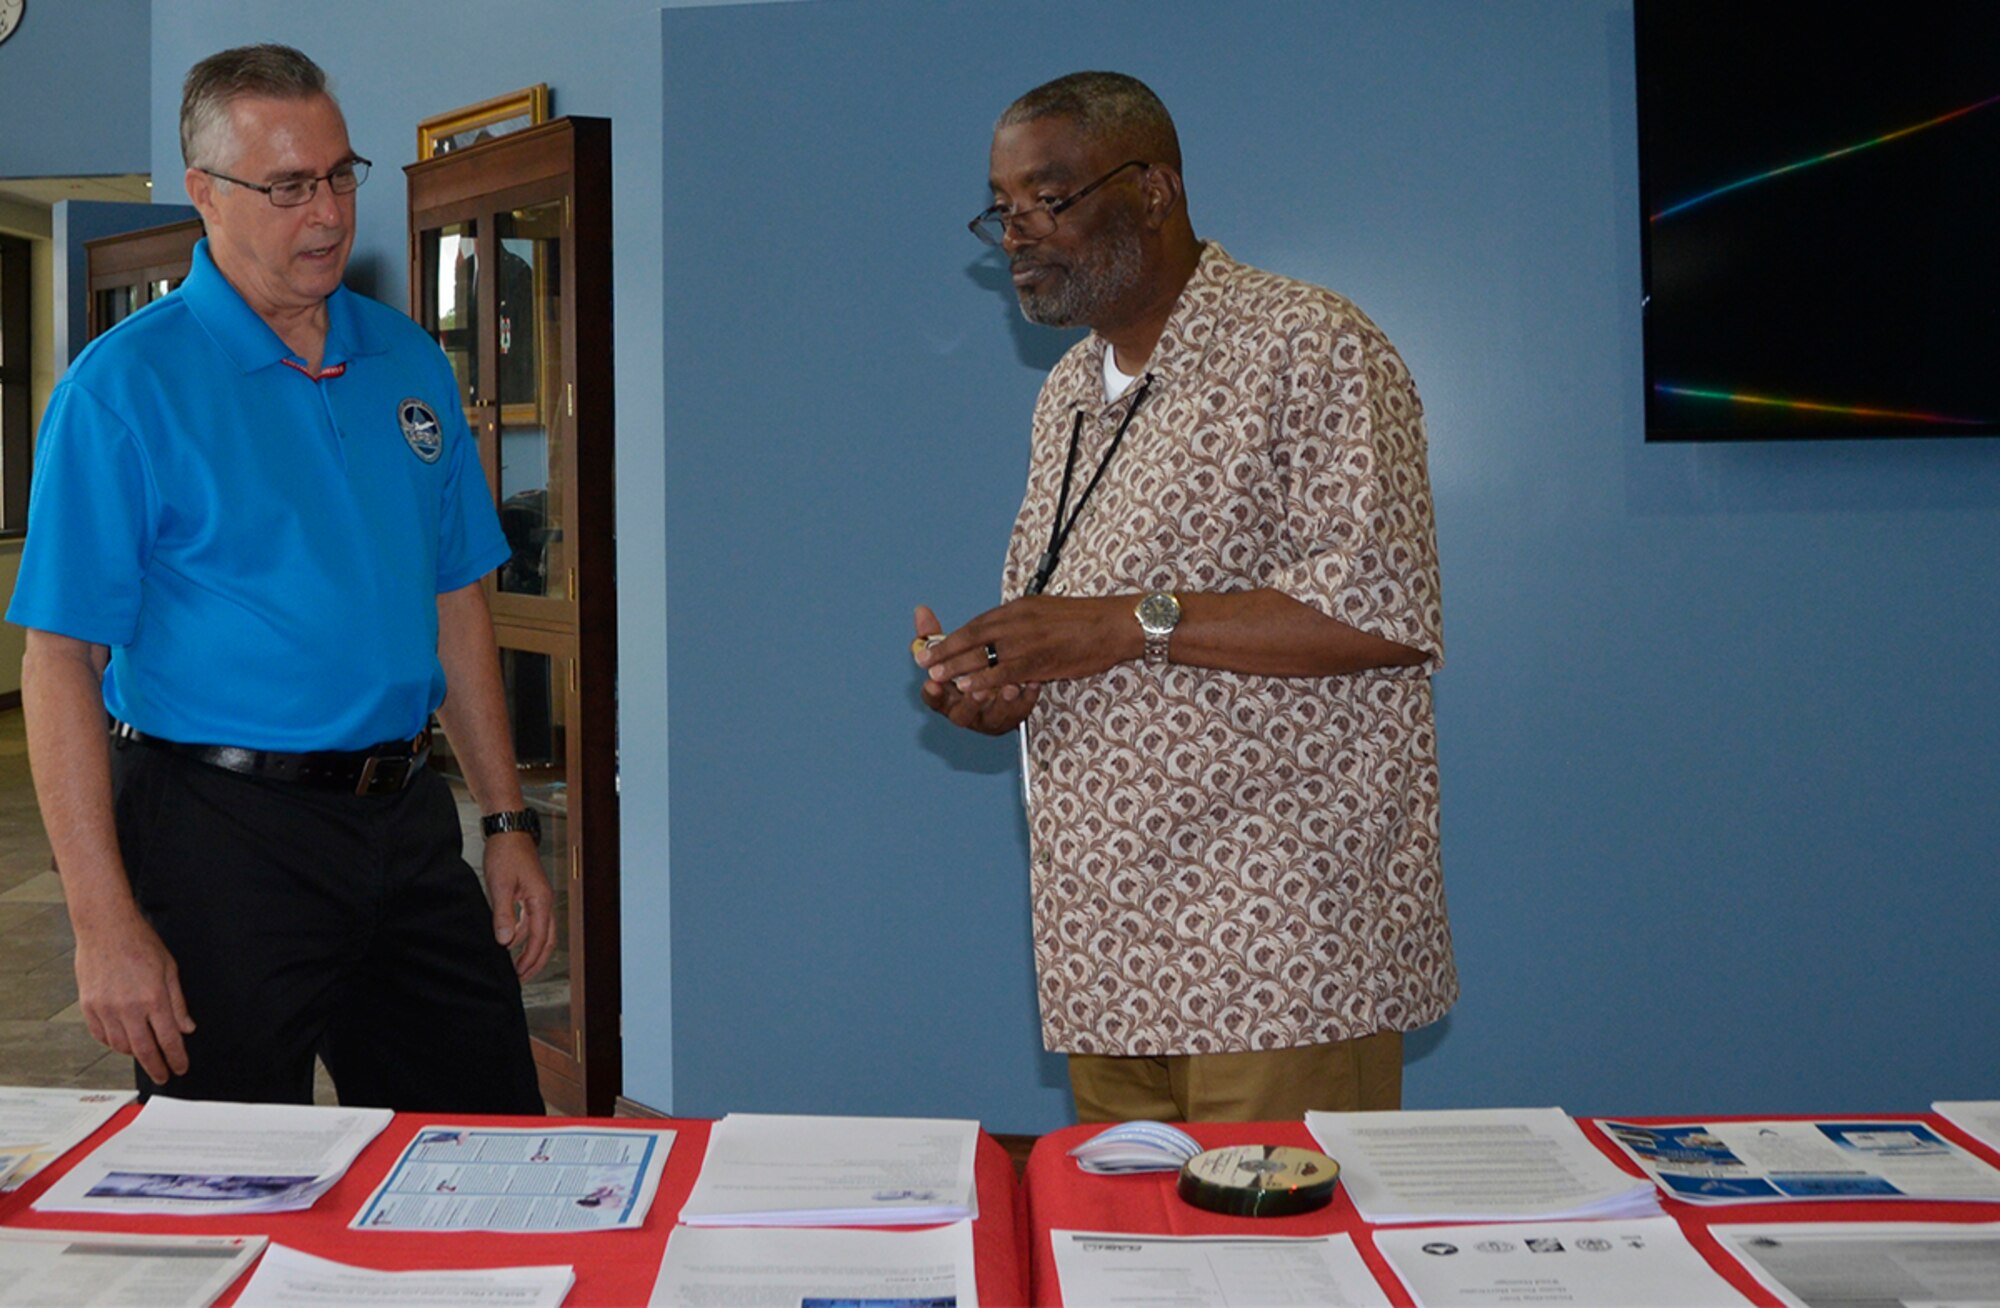 John Bender, 1st Air Force (Air Forces Northern) Installation and Mission Support Directorate, talks with Don Howell, 1st AF (AFNORTH) Manpower, Personnel and Services Directorate, about some of the hurricane preparedness materials he has available on a table in the Killey Center for Homeland Operations here June 12. The 2018 hurricane season started June 1 during which  meteorology officials estimate there will be 14 named storms with seven becoming full-up hurricanes. (Photo by Mary McHale)